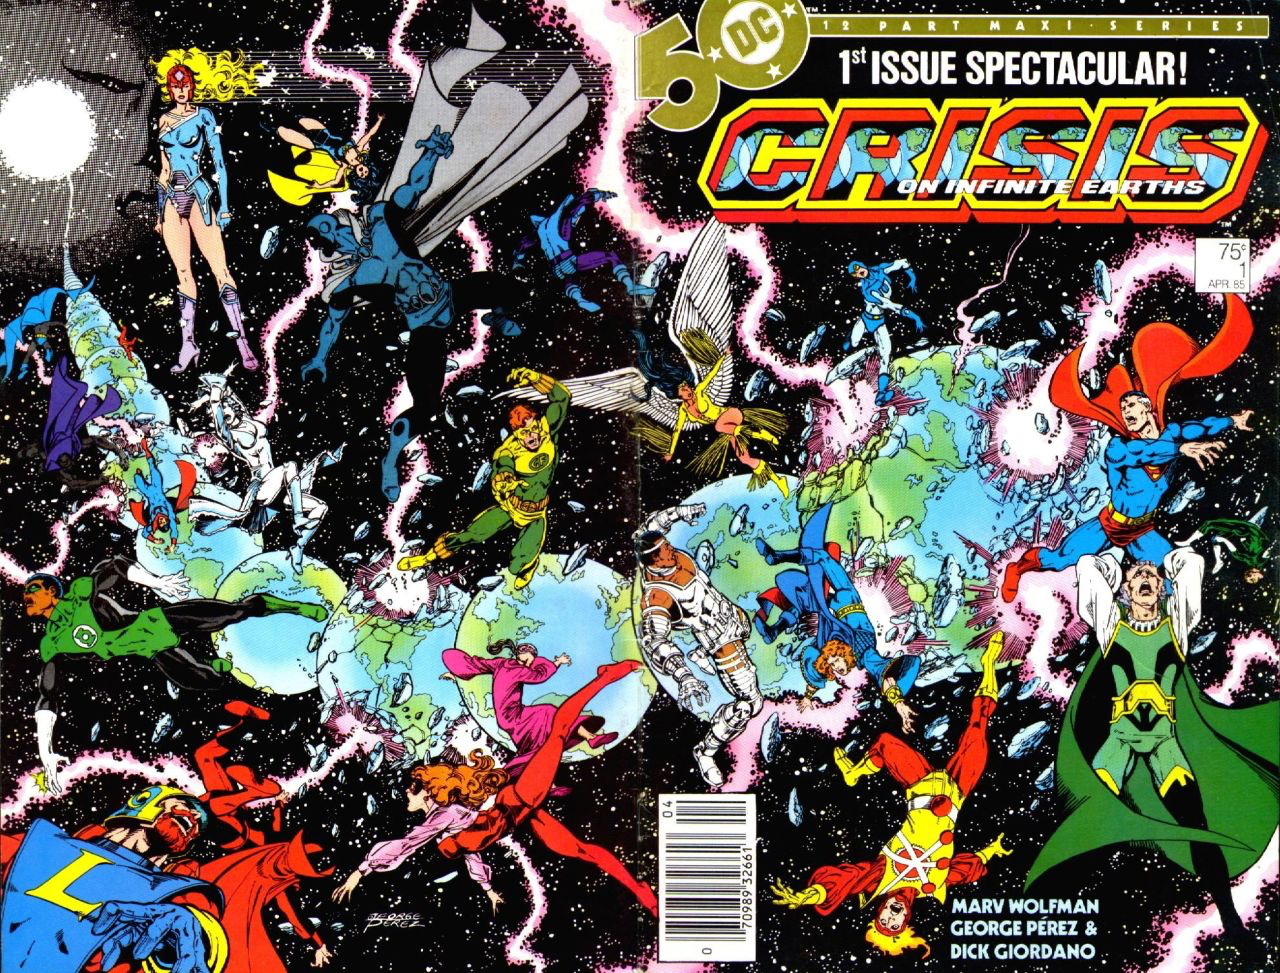 Crisis on Infinite Earths #1 - art by George Pére